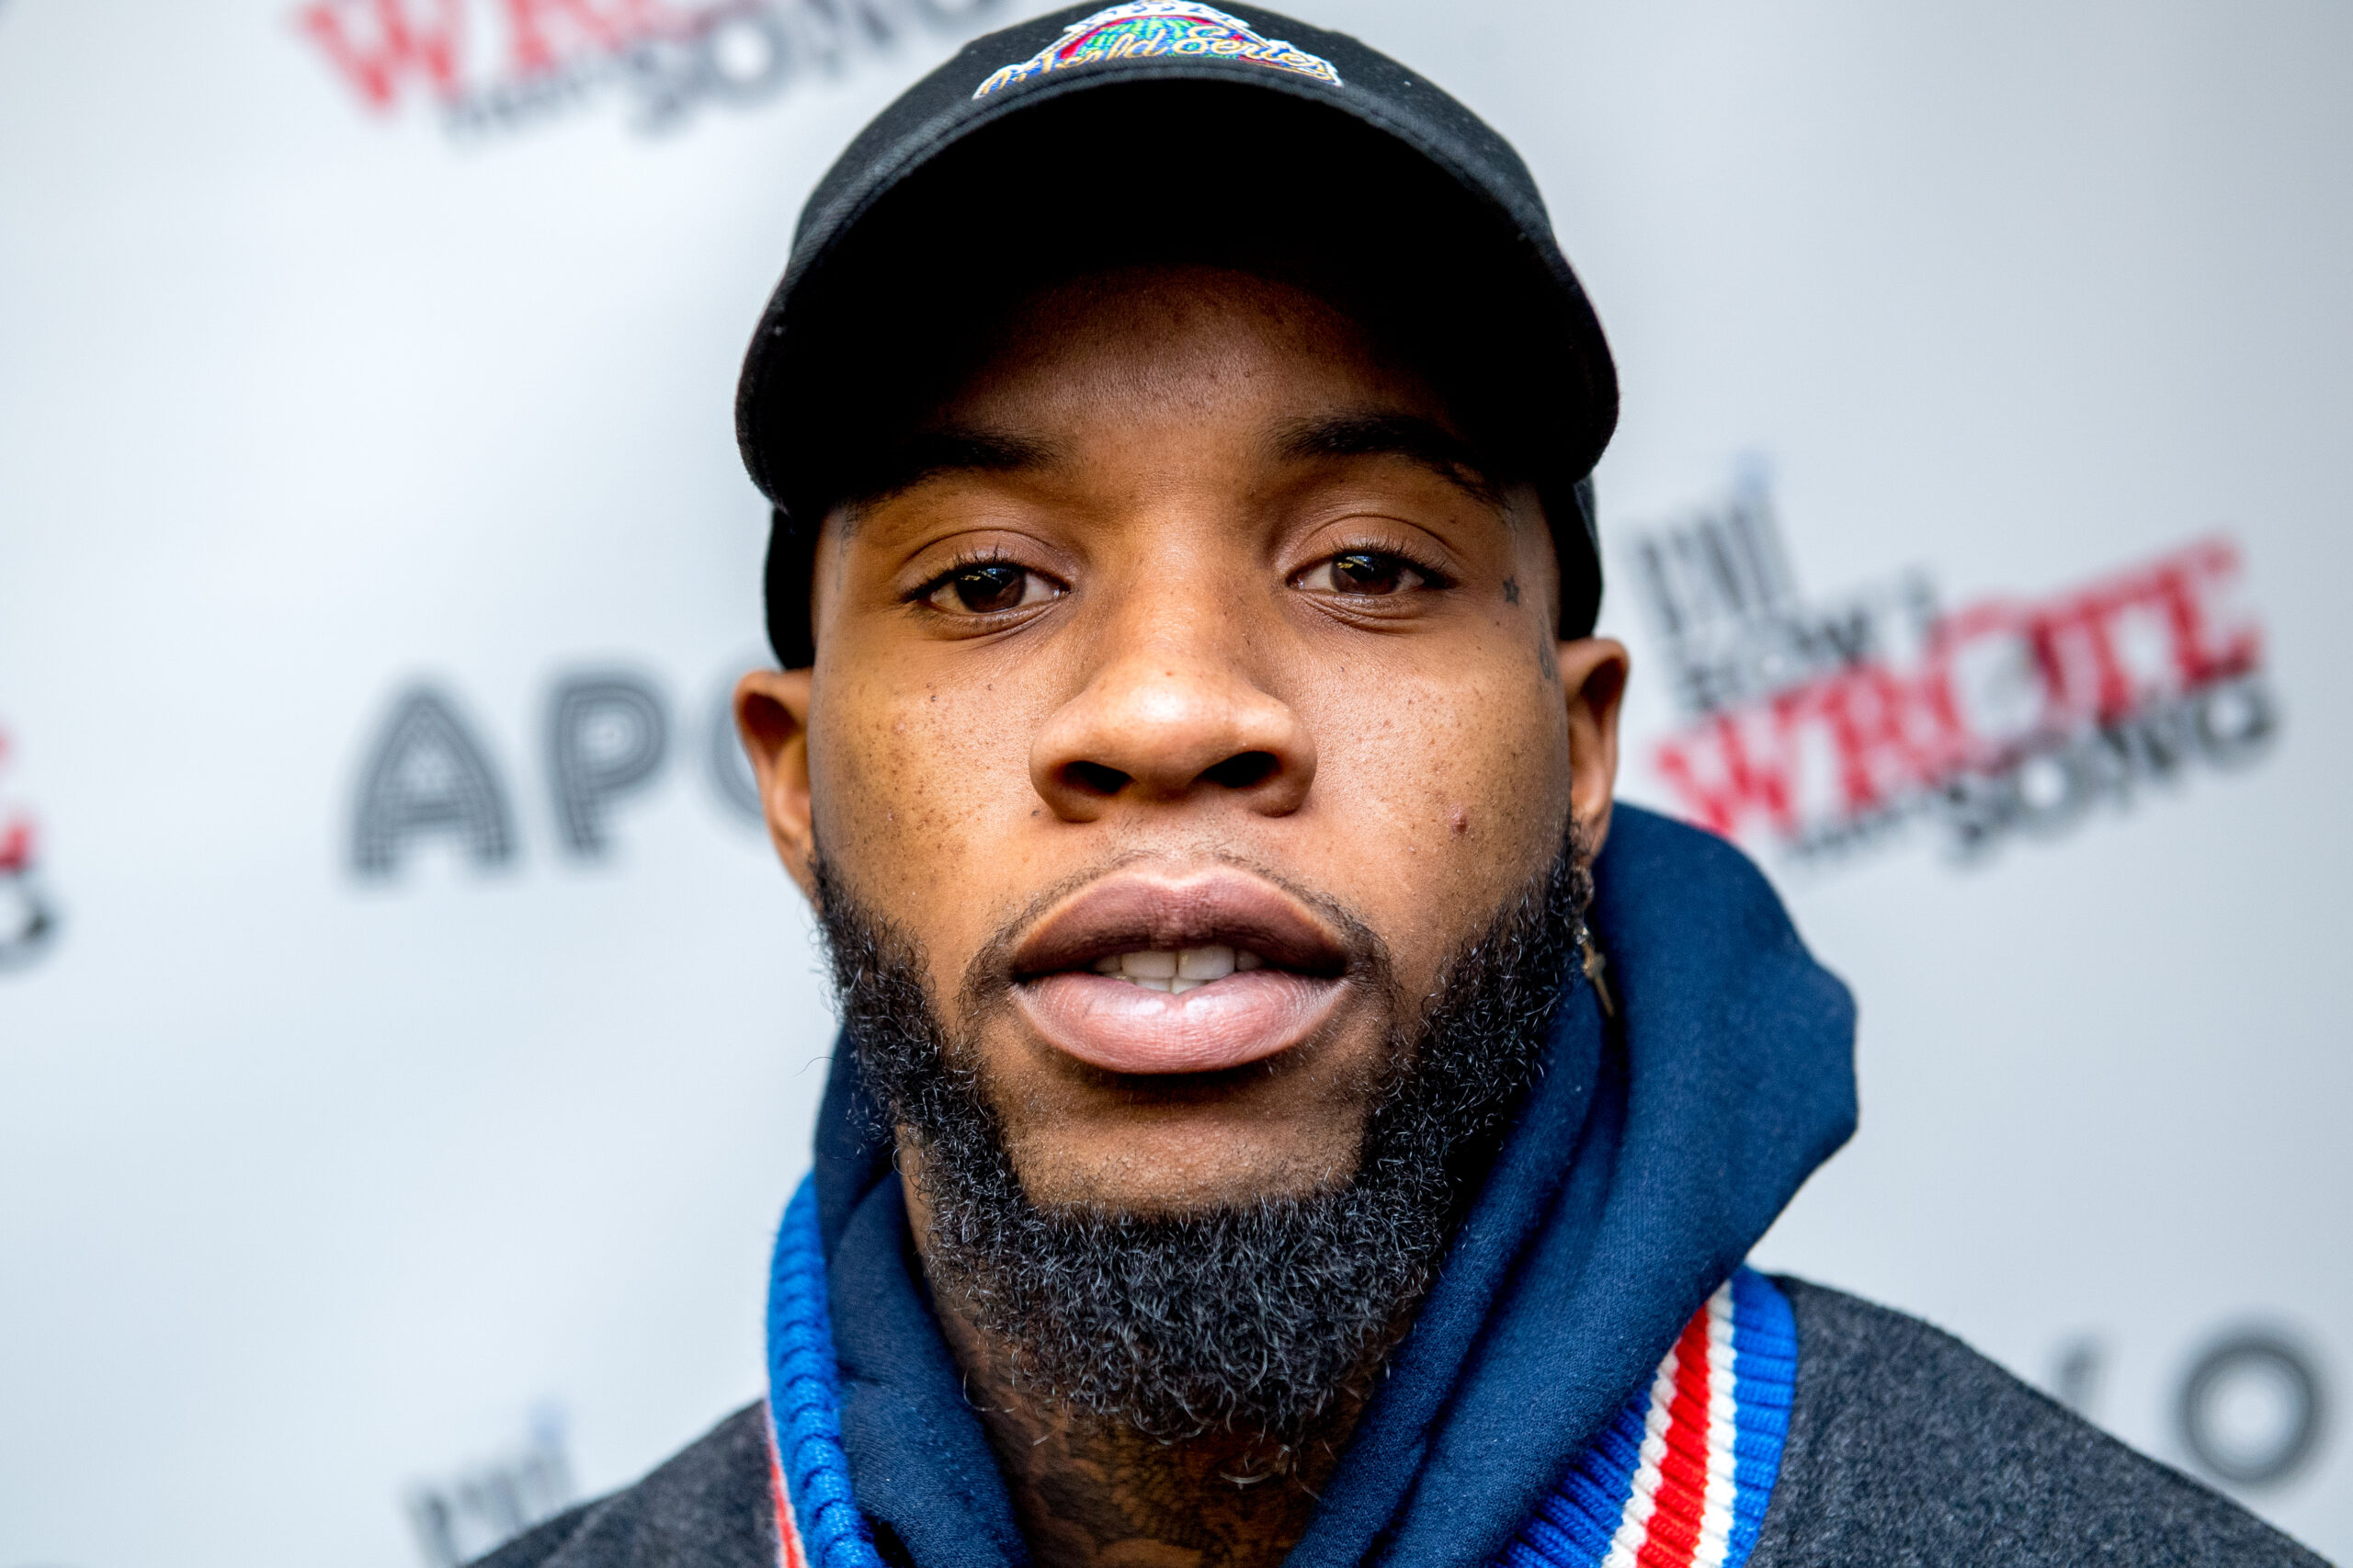 Tory Lanez Update: General Population & Special Programs Reportedly Of Interest To Rapper